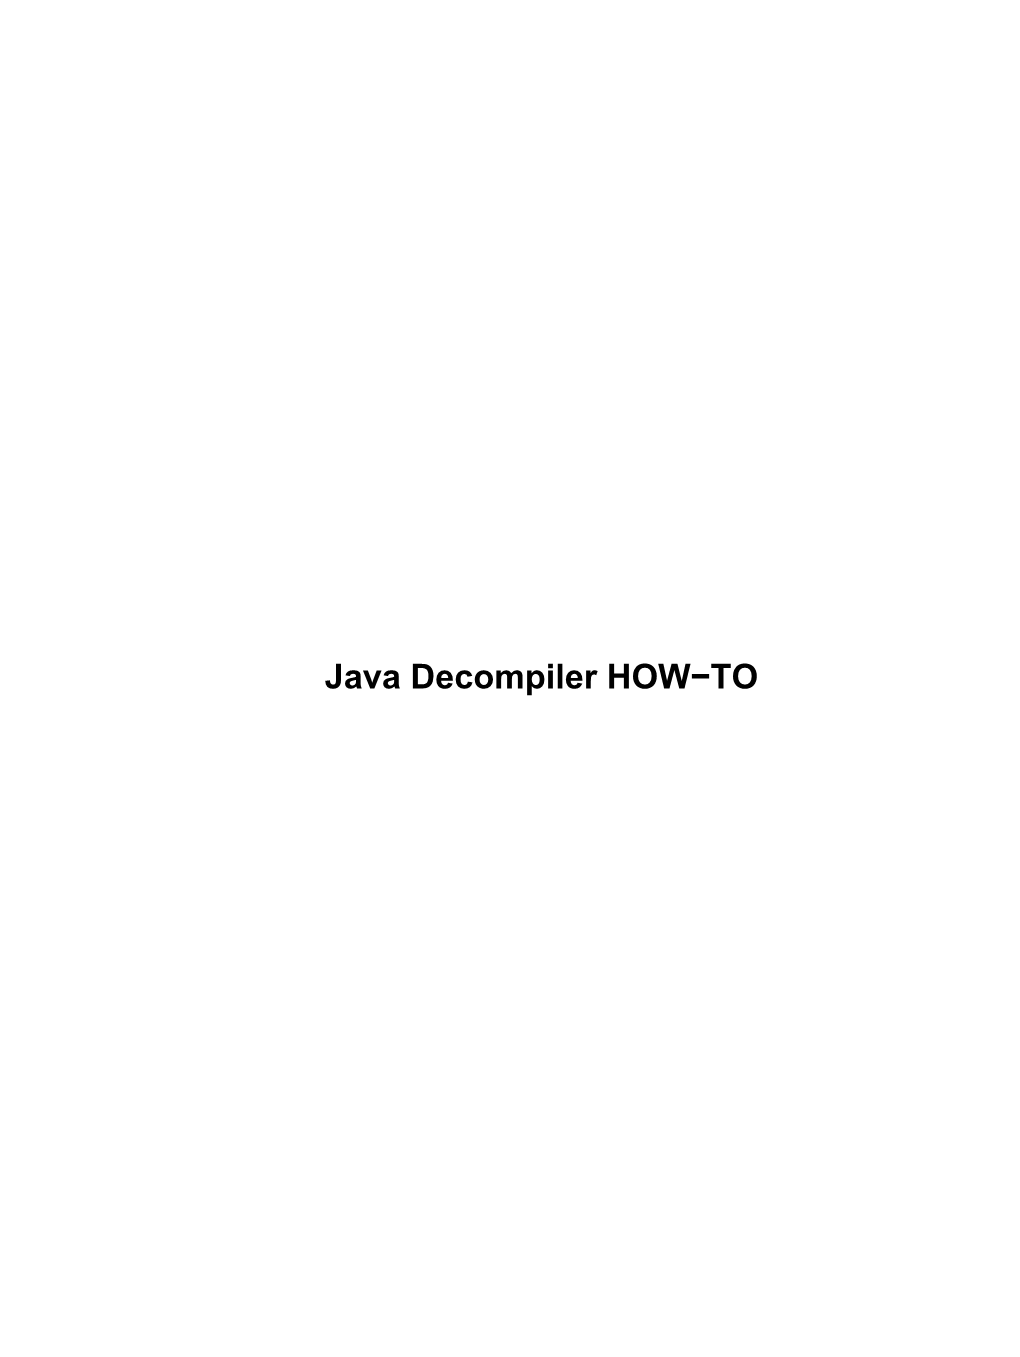 Java Decompiler HOW-TO